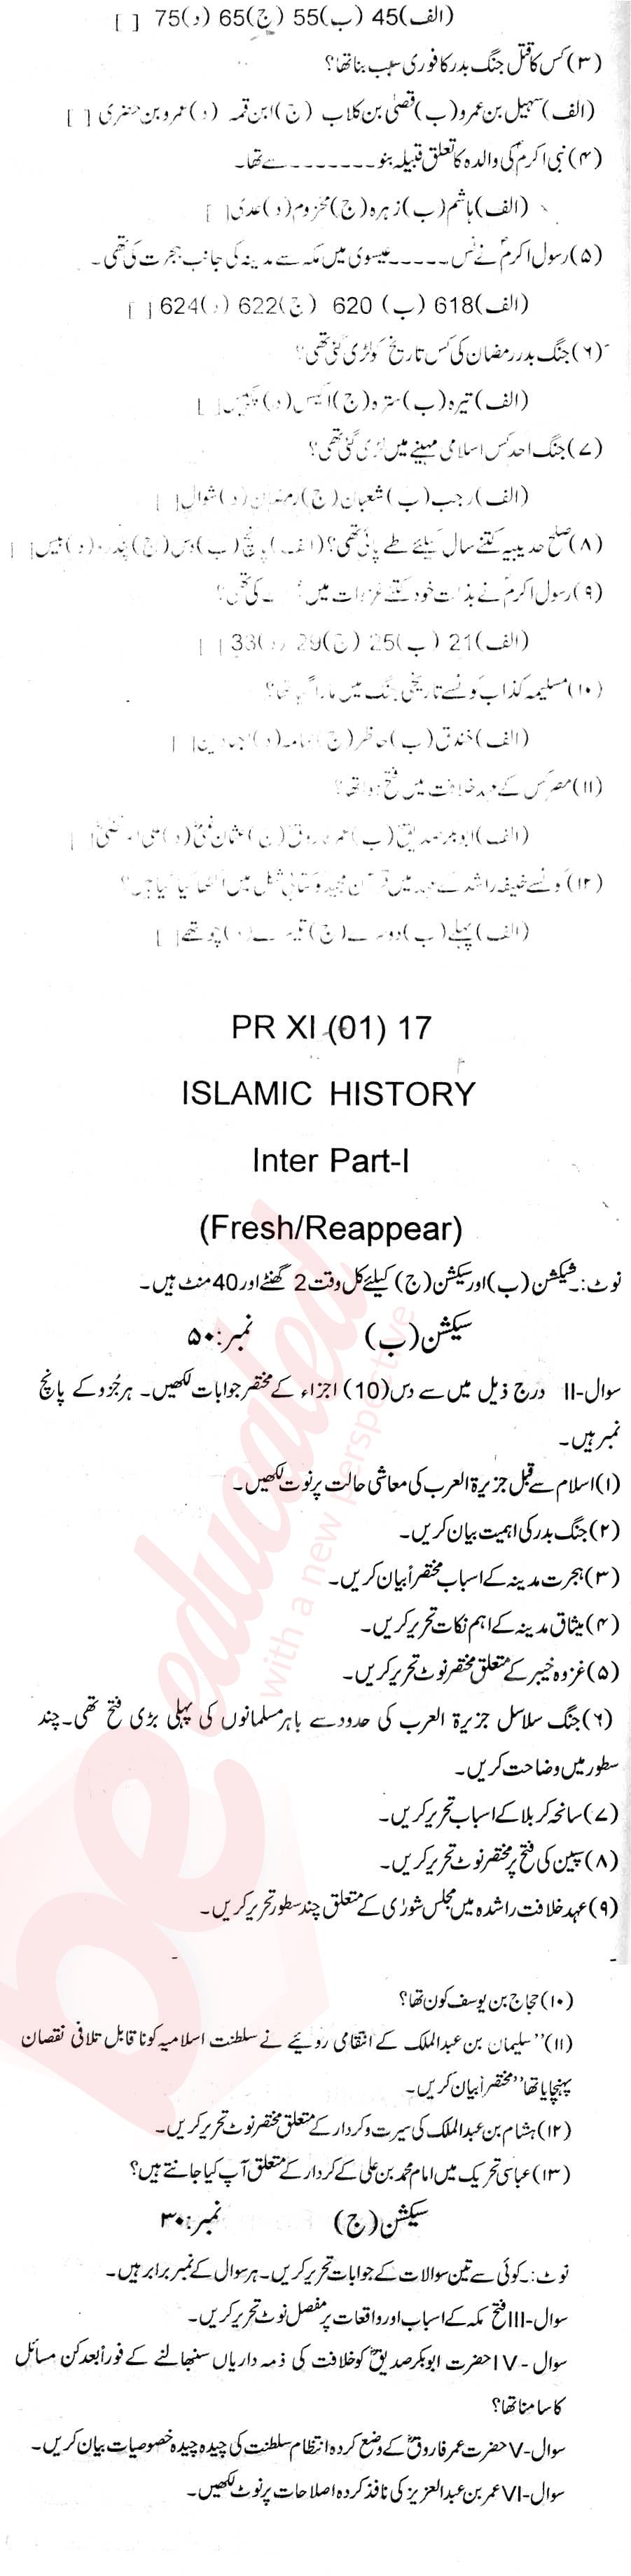 Islamic History FA Part 1 Past Paper Group 1 BISE Bannu 2017